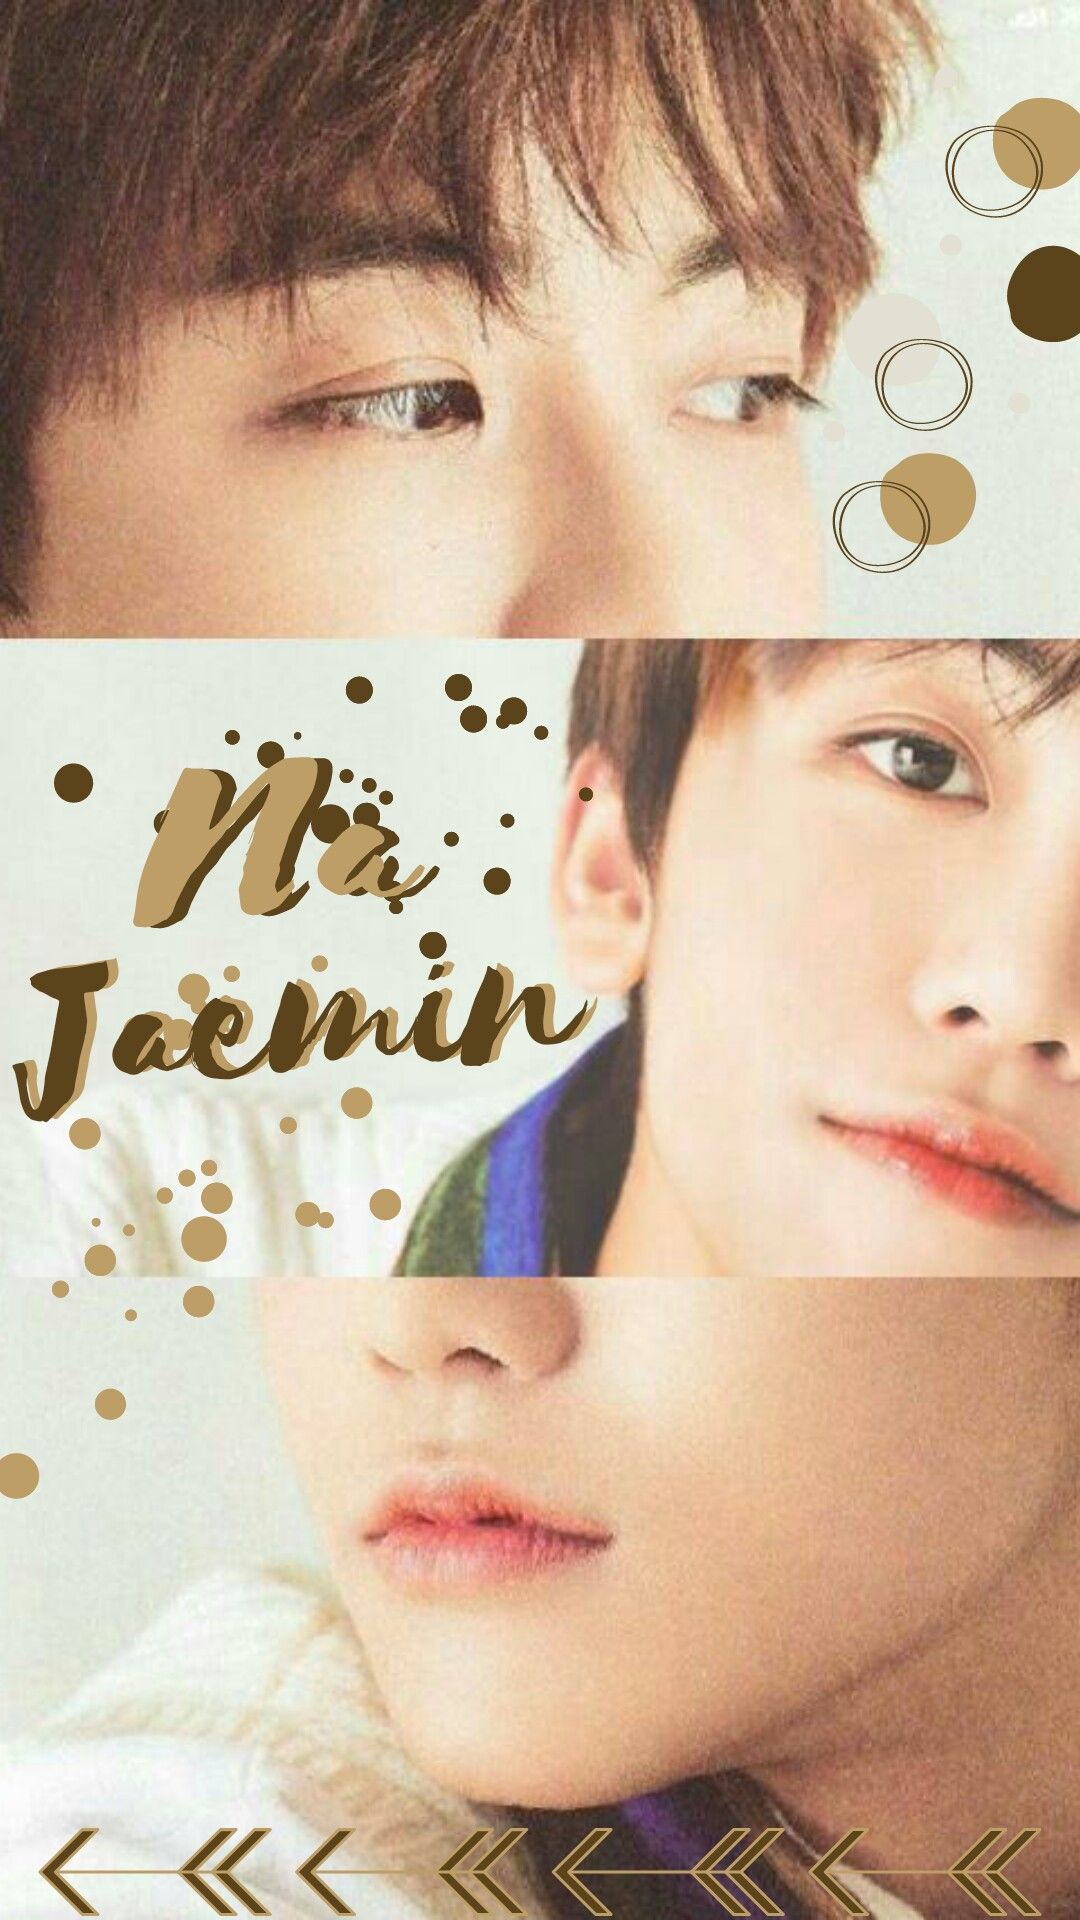 Free download Nct Jaemin Wallpaper by Hanin nct nct2018 nctdream